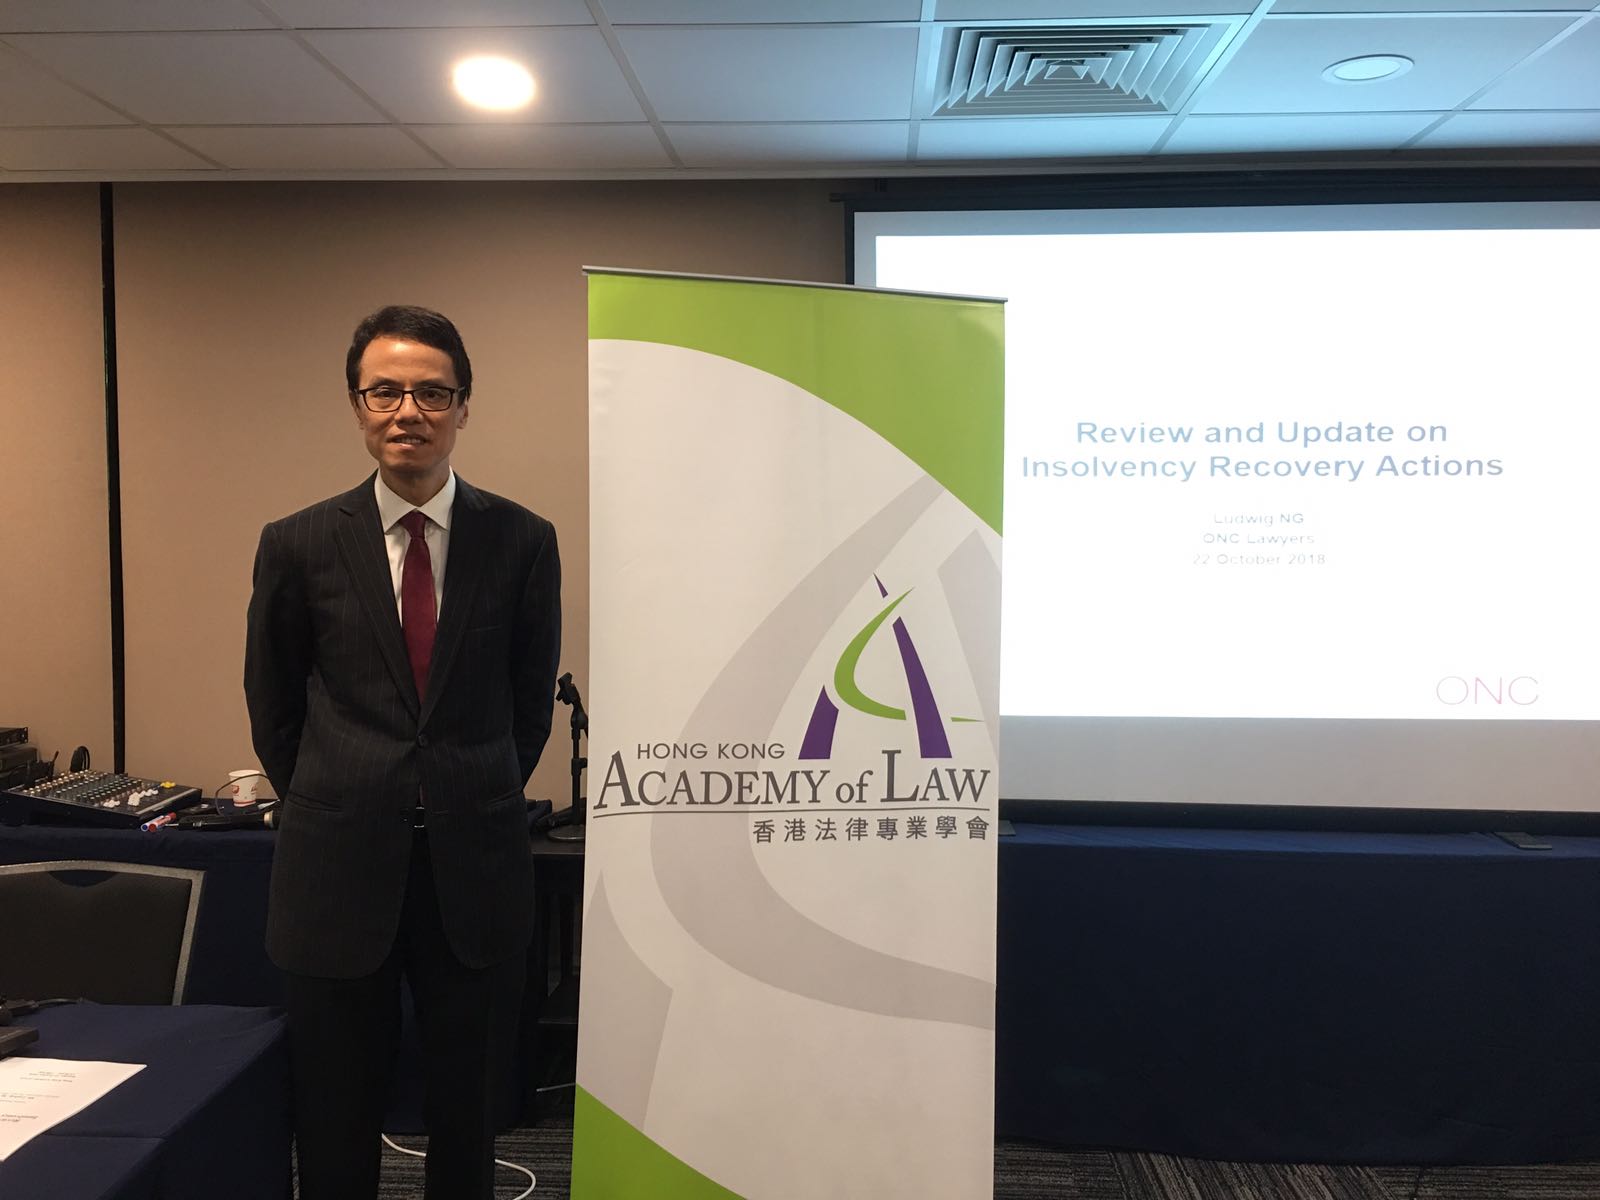 seminar on “Insolvency Recovery Actions”